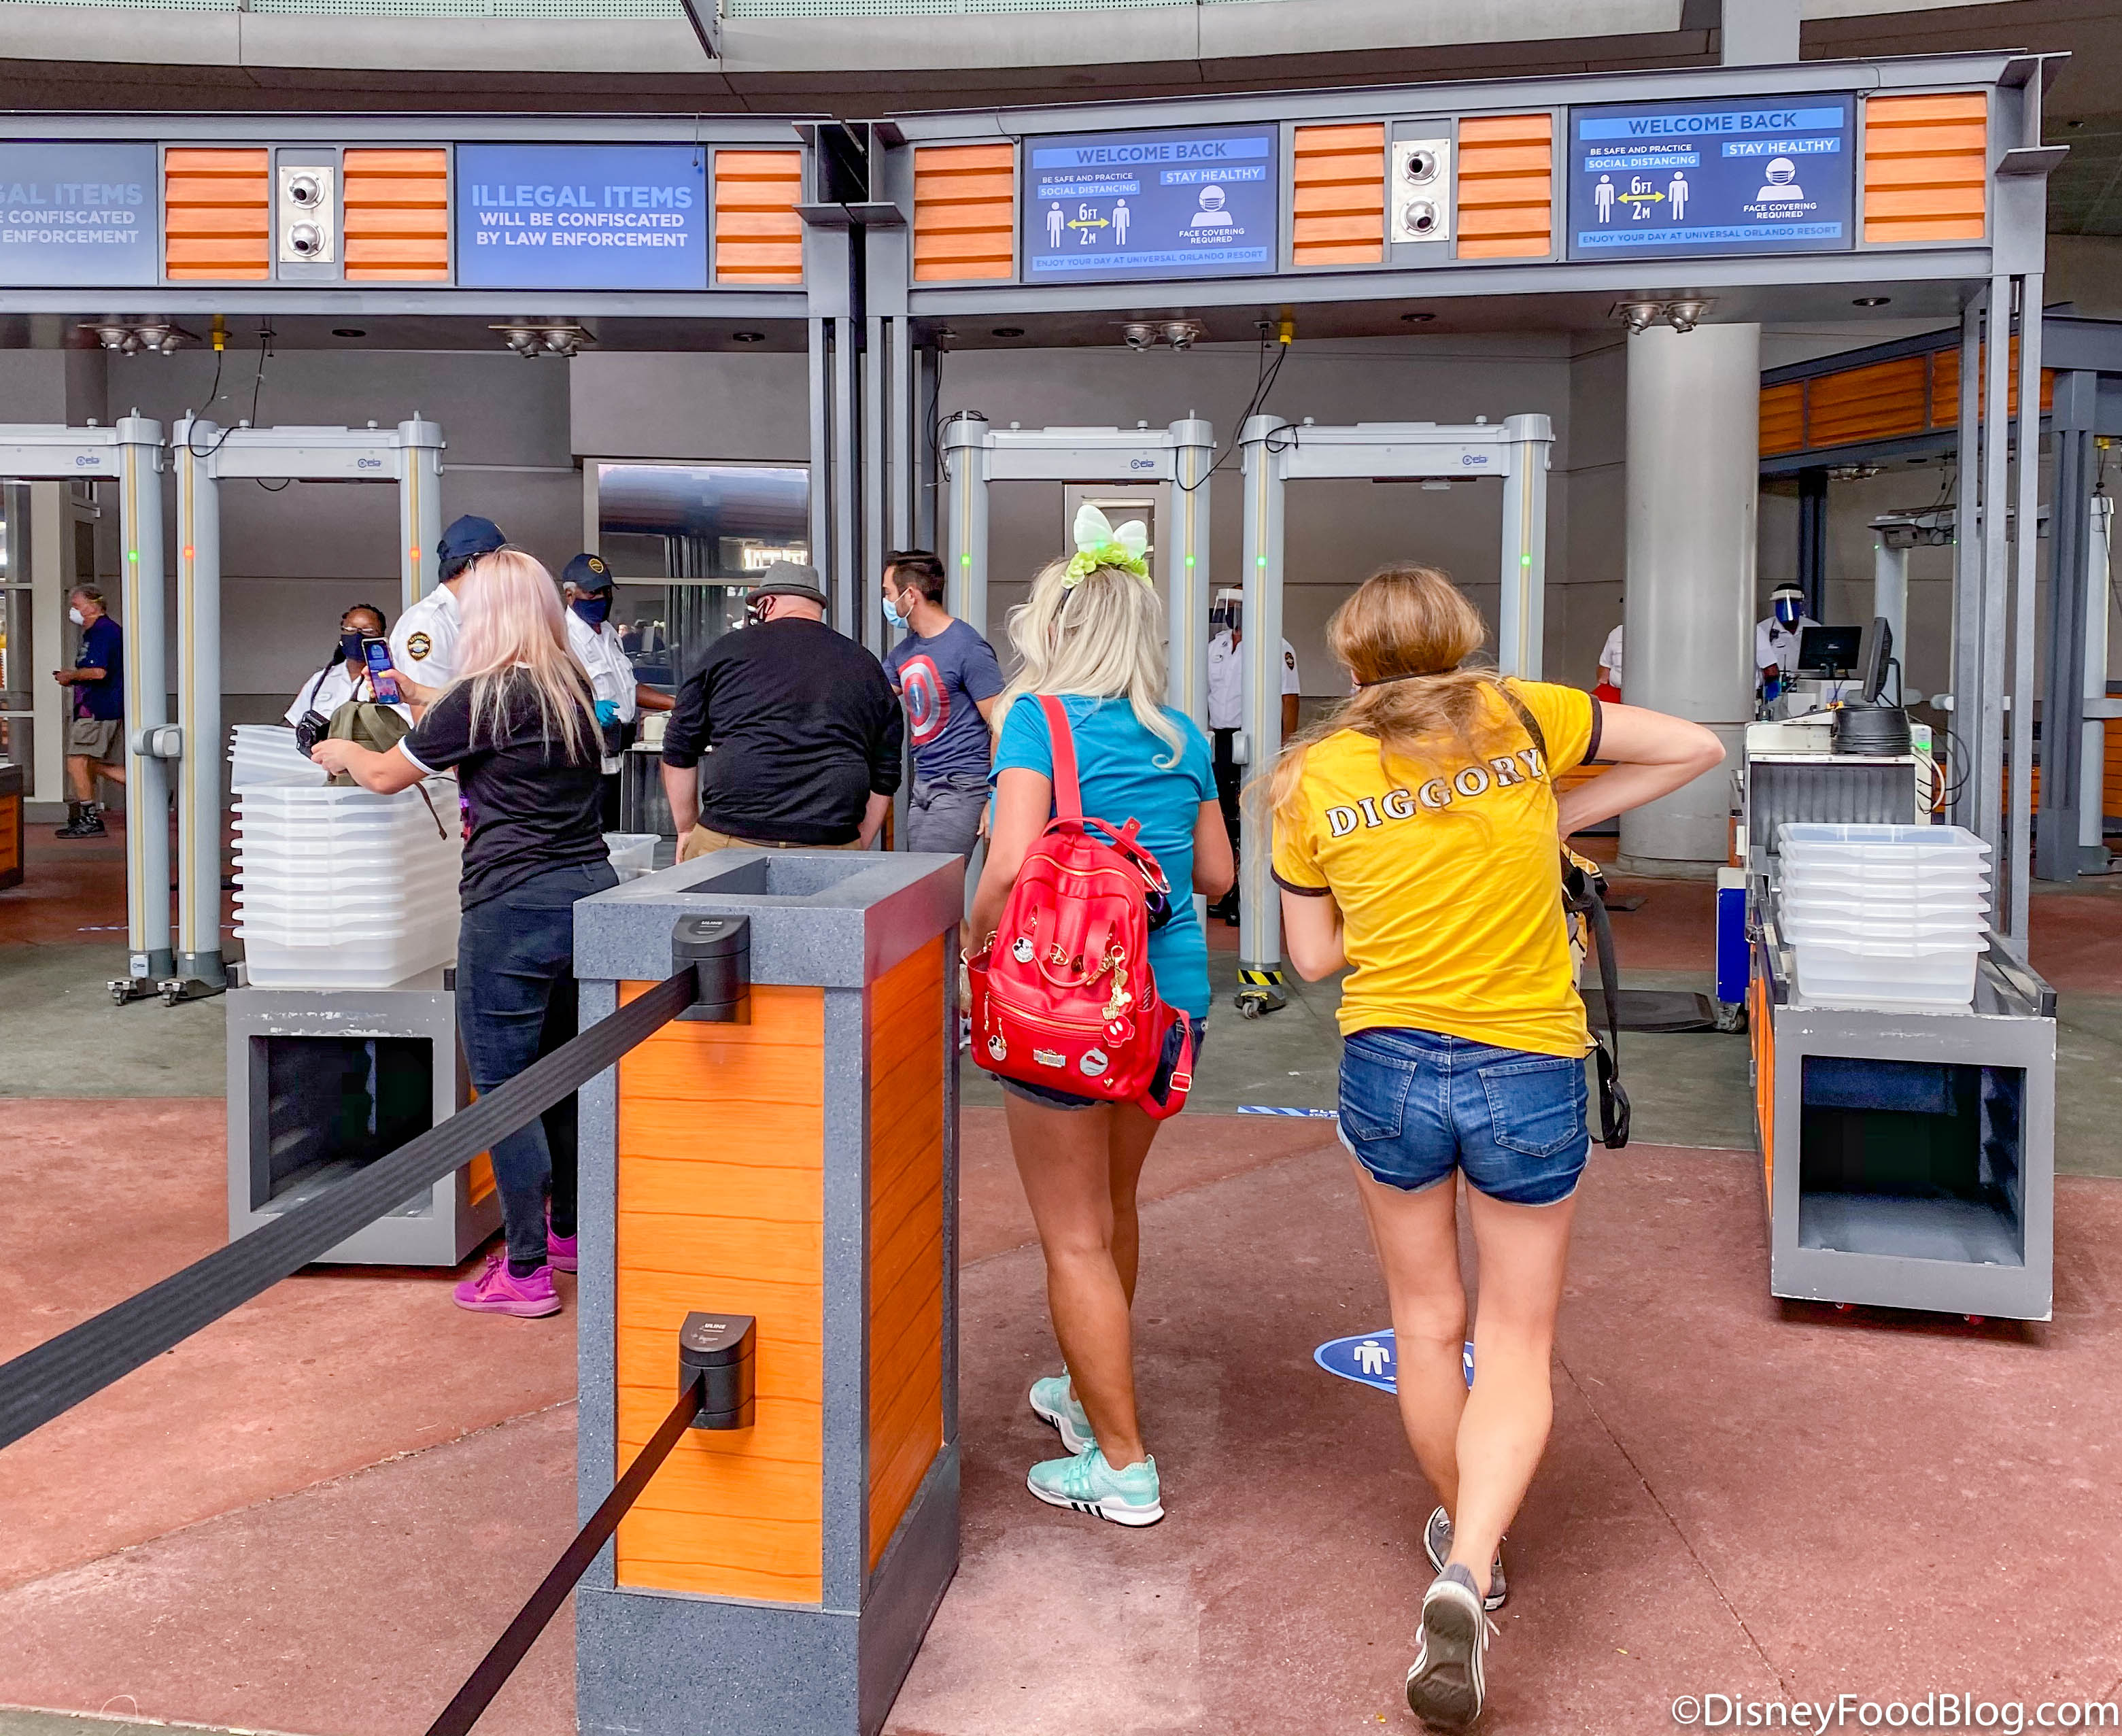 Our Experience with Temperature Checks at the Newly Reopened Universal